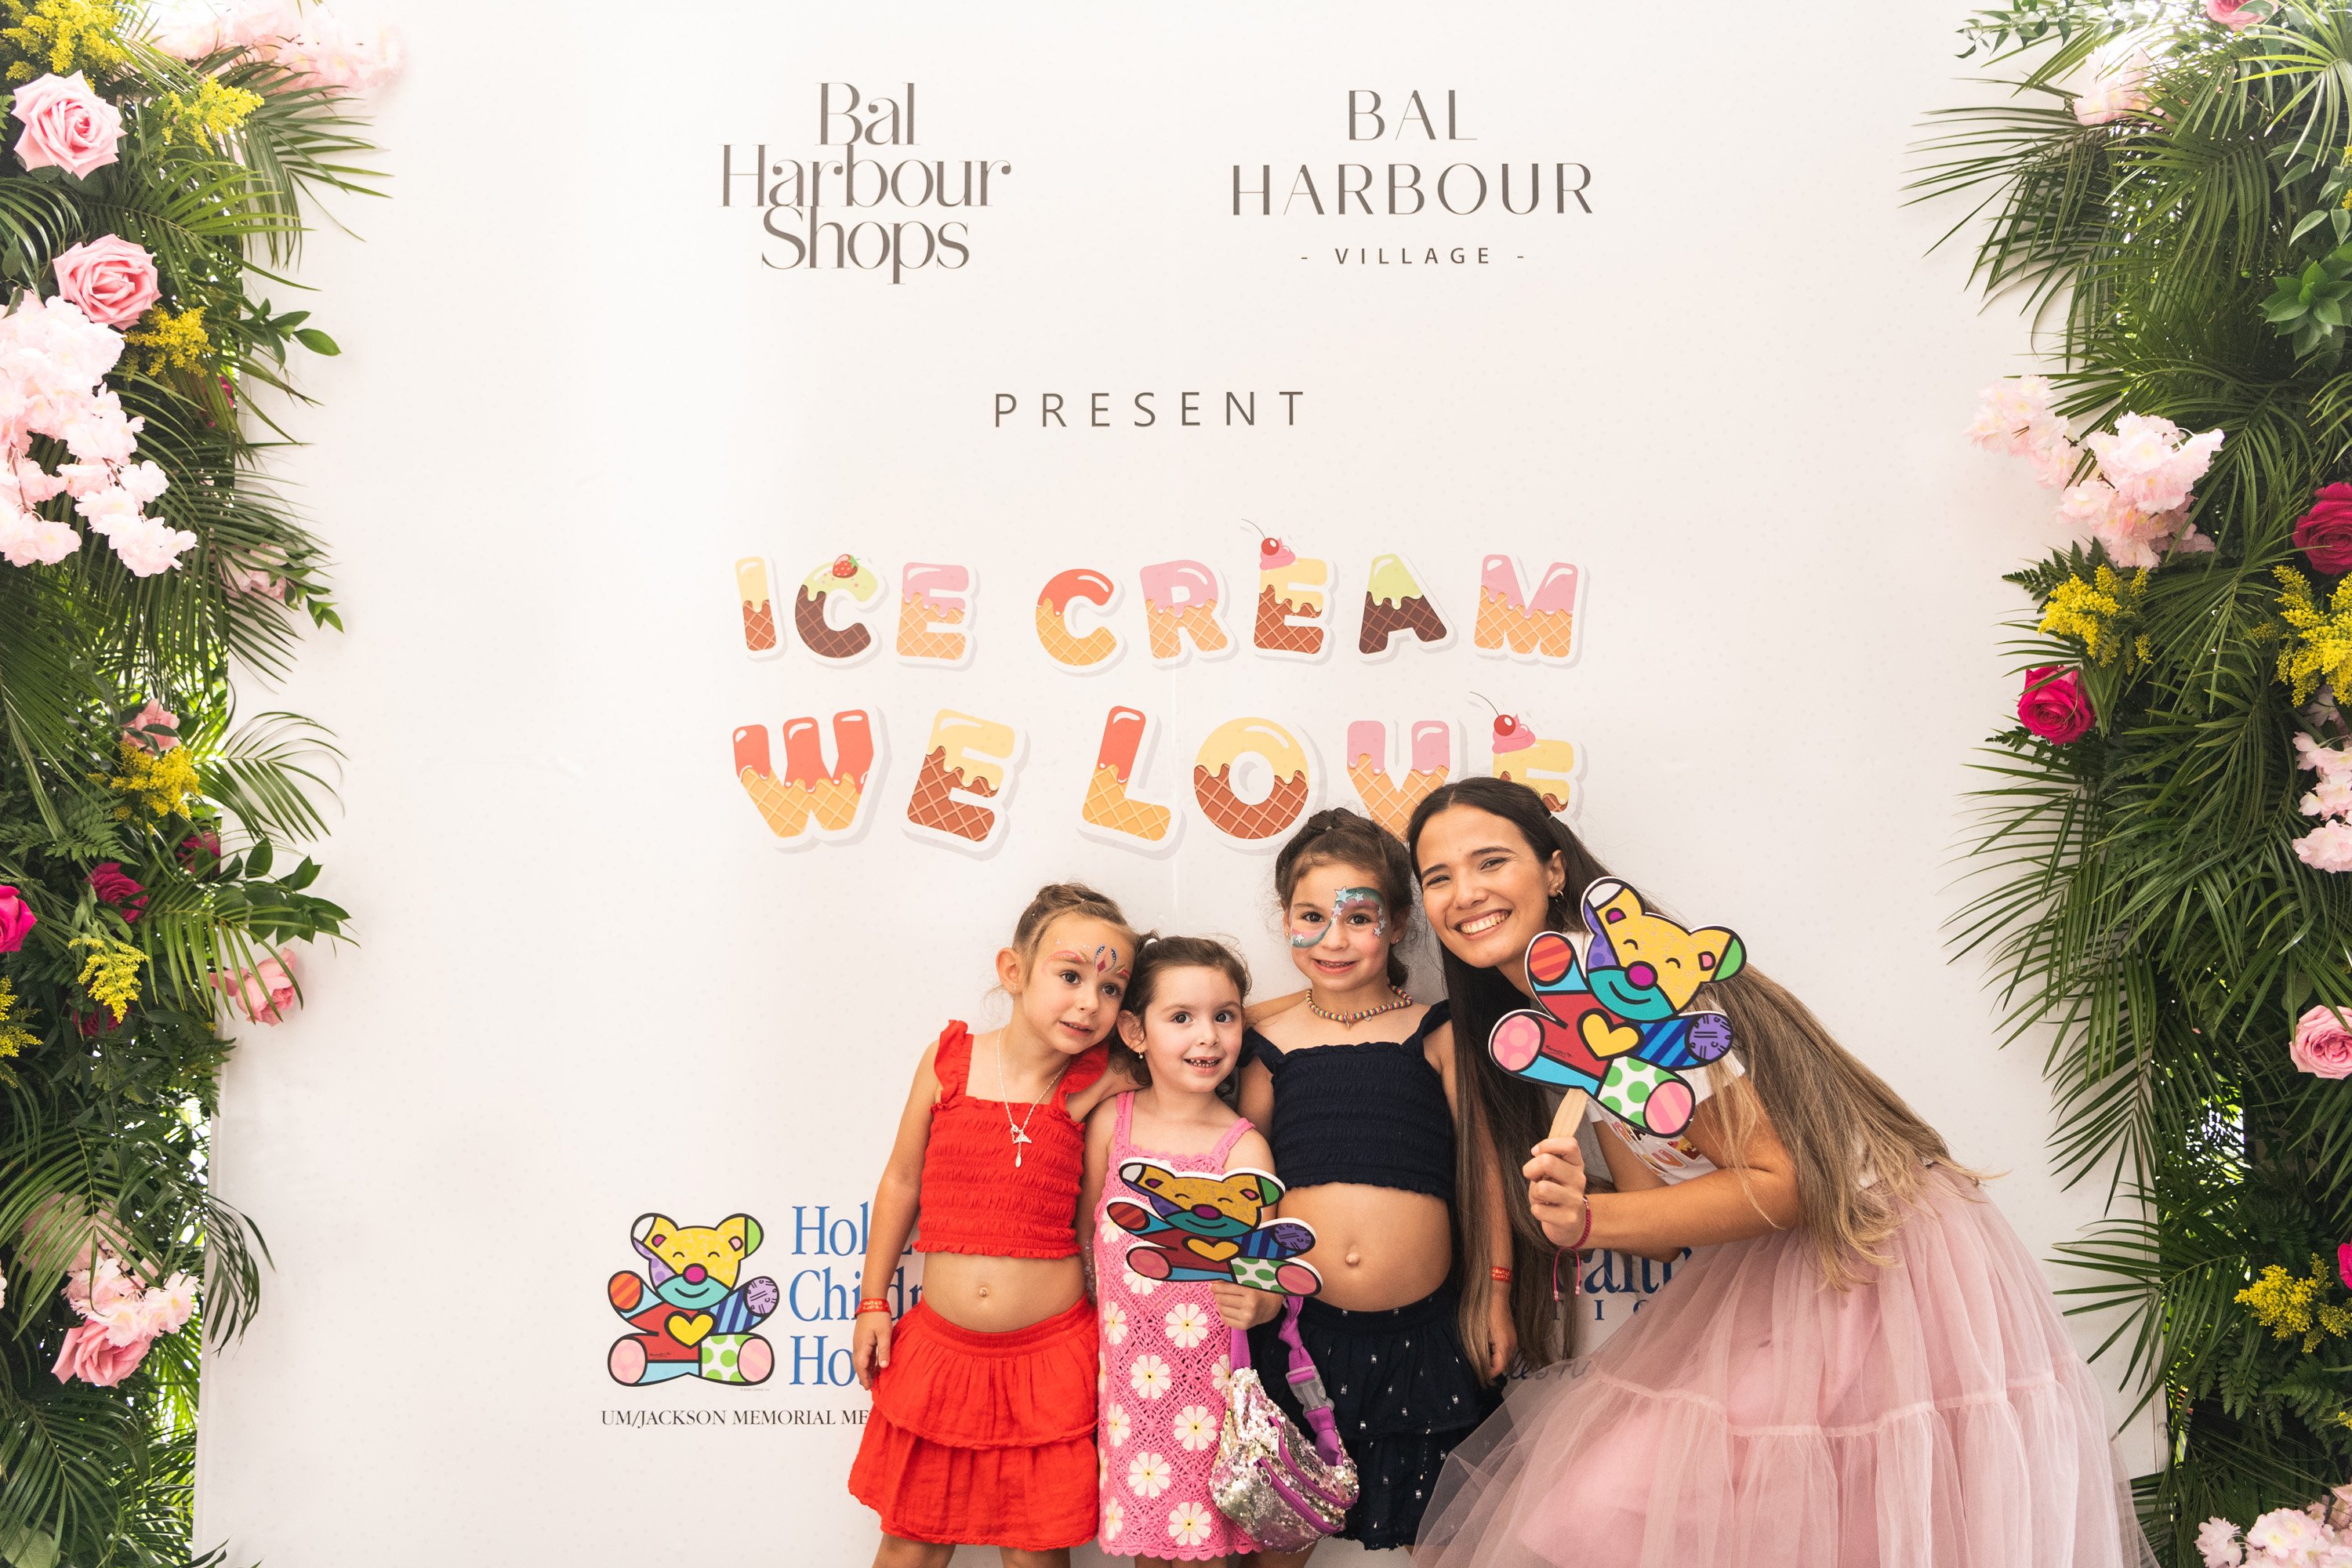 Children in attendance posed with Ice Cream We Love ambassadors for picture perfect moment